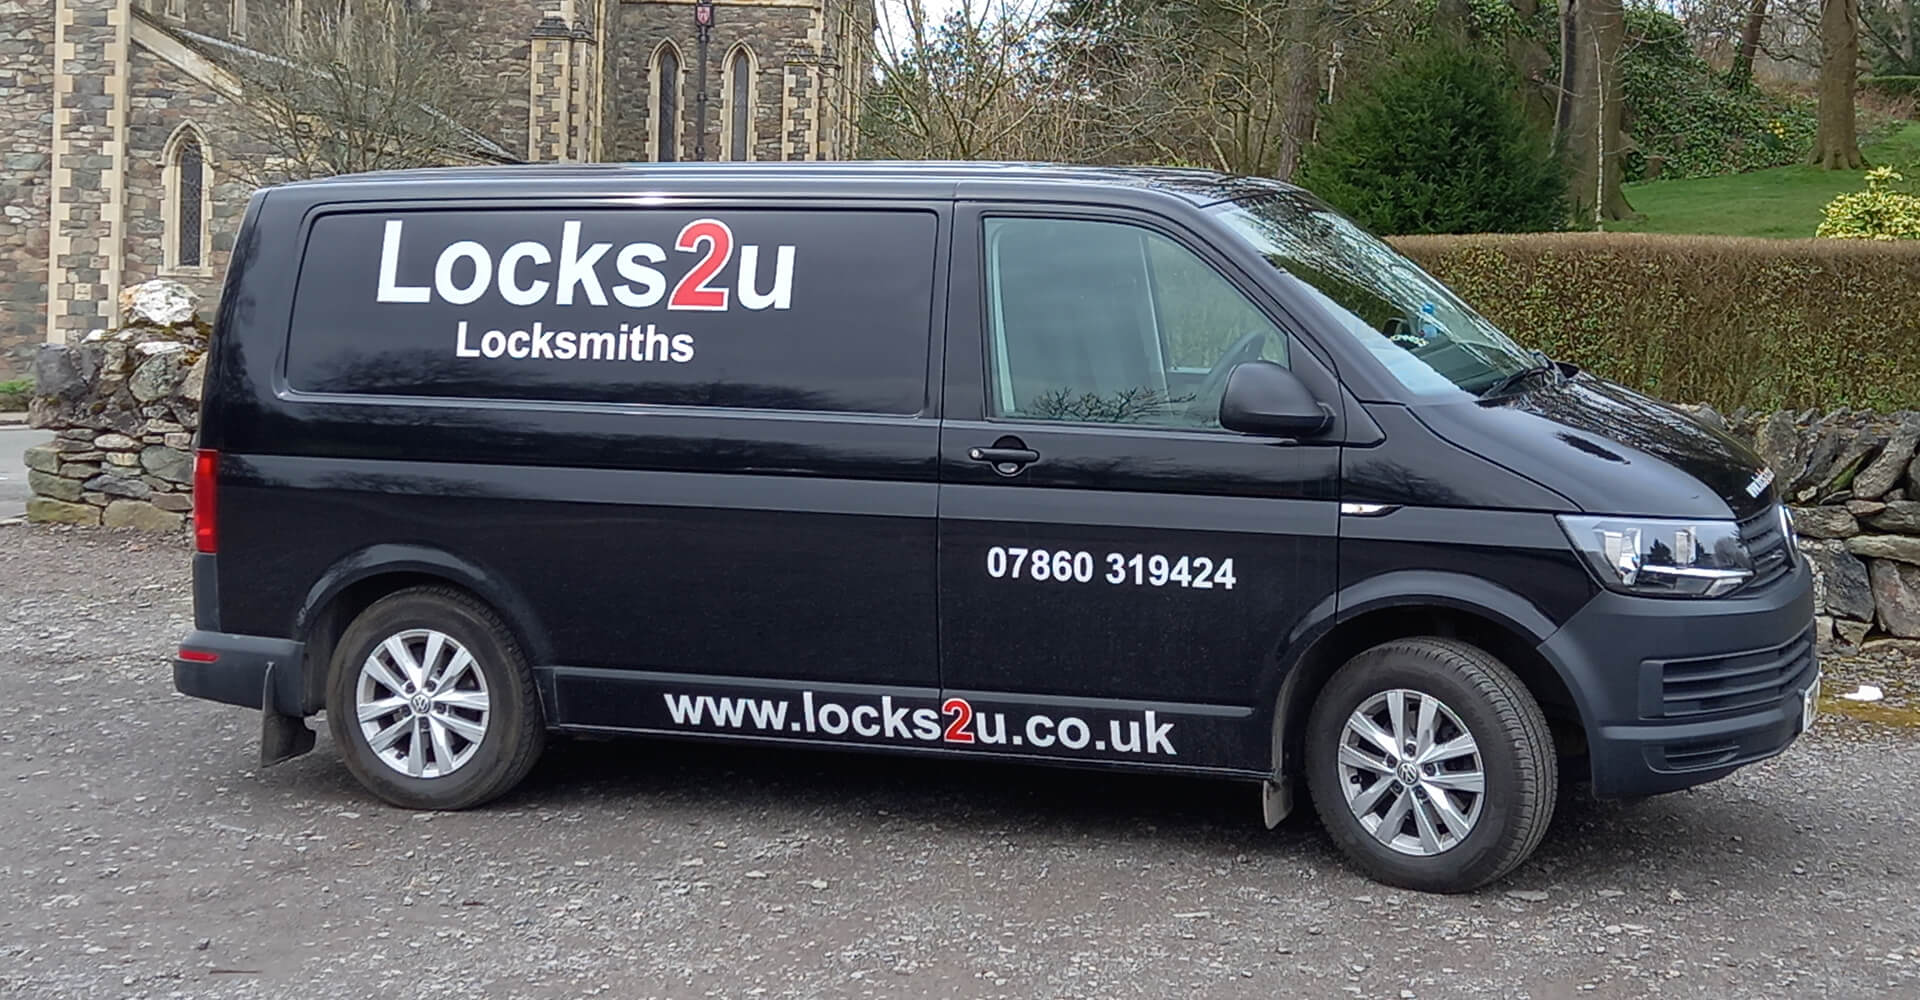 Locksmith and mobile locksmiths in Coalville, Ashby, Shepshed, Loughborough, Kegworth